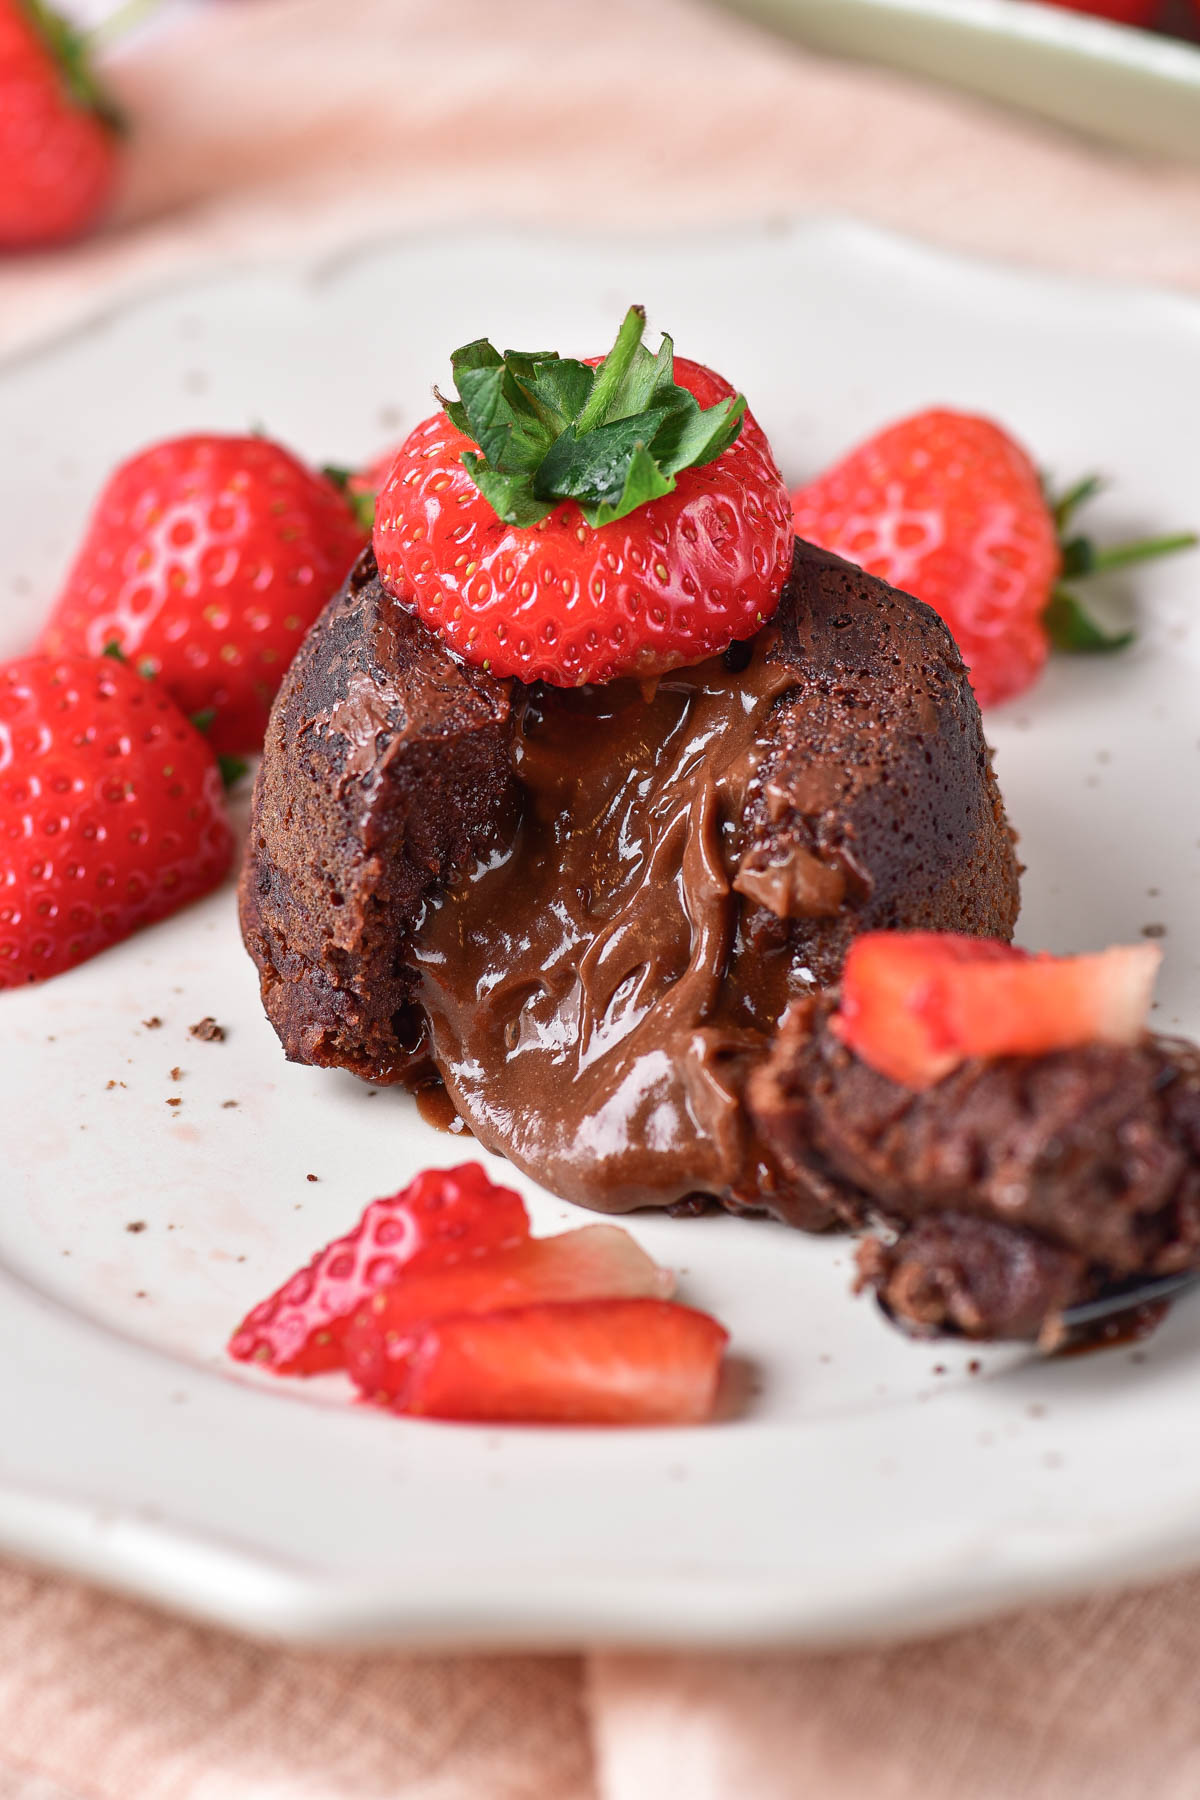 one chocolate lava cake served with strawberries